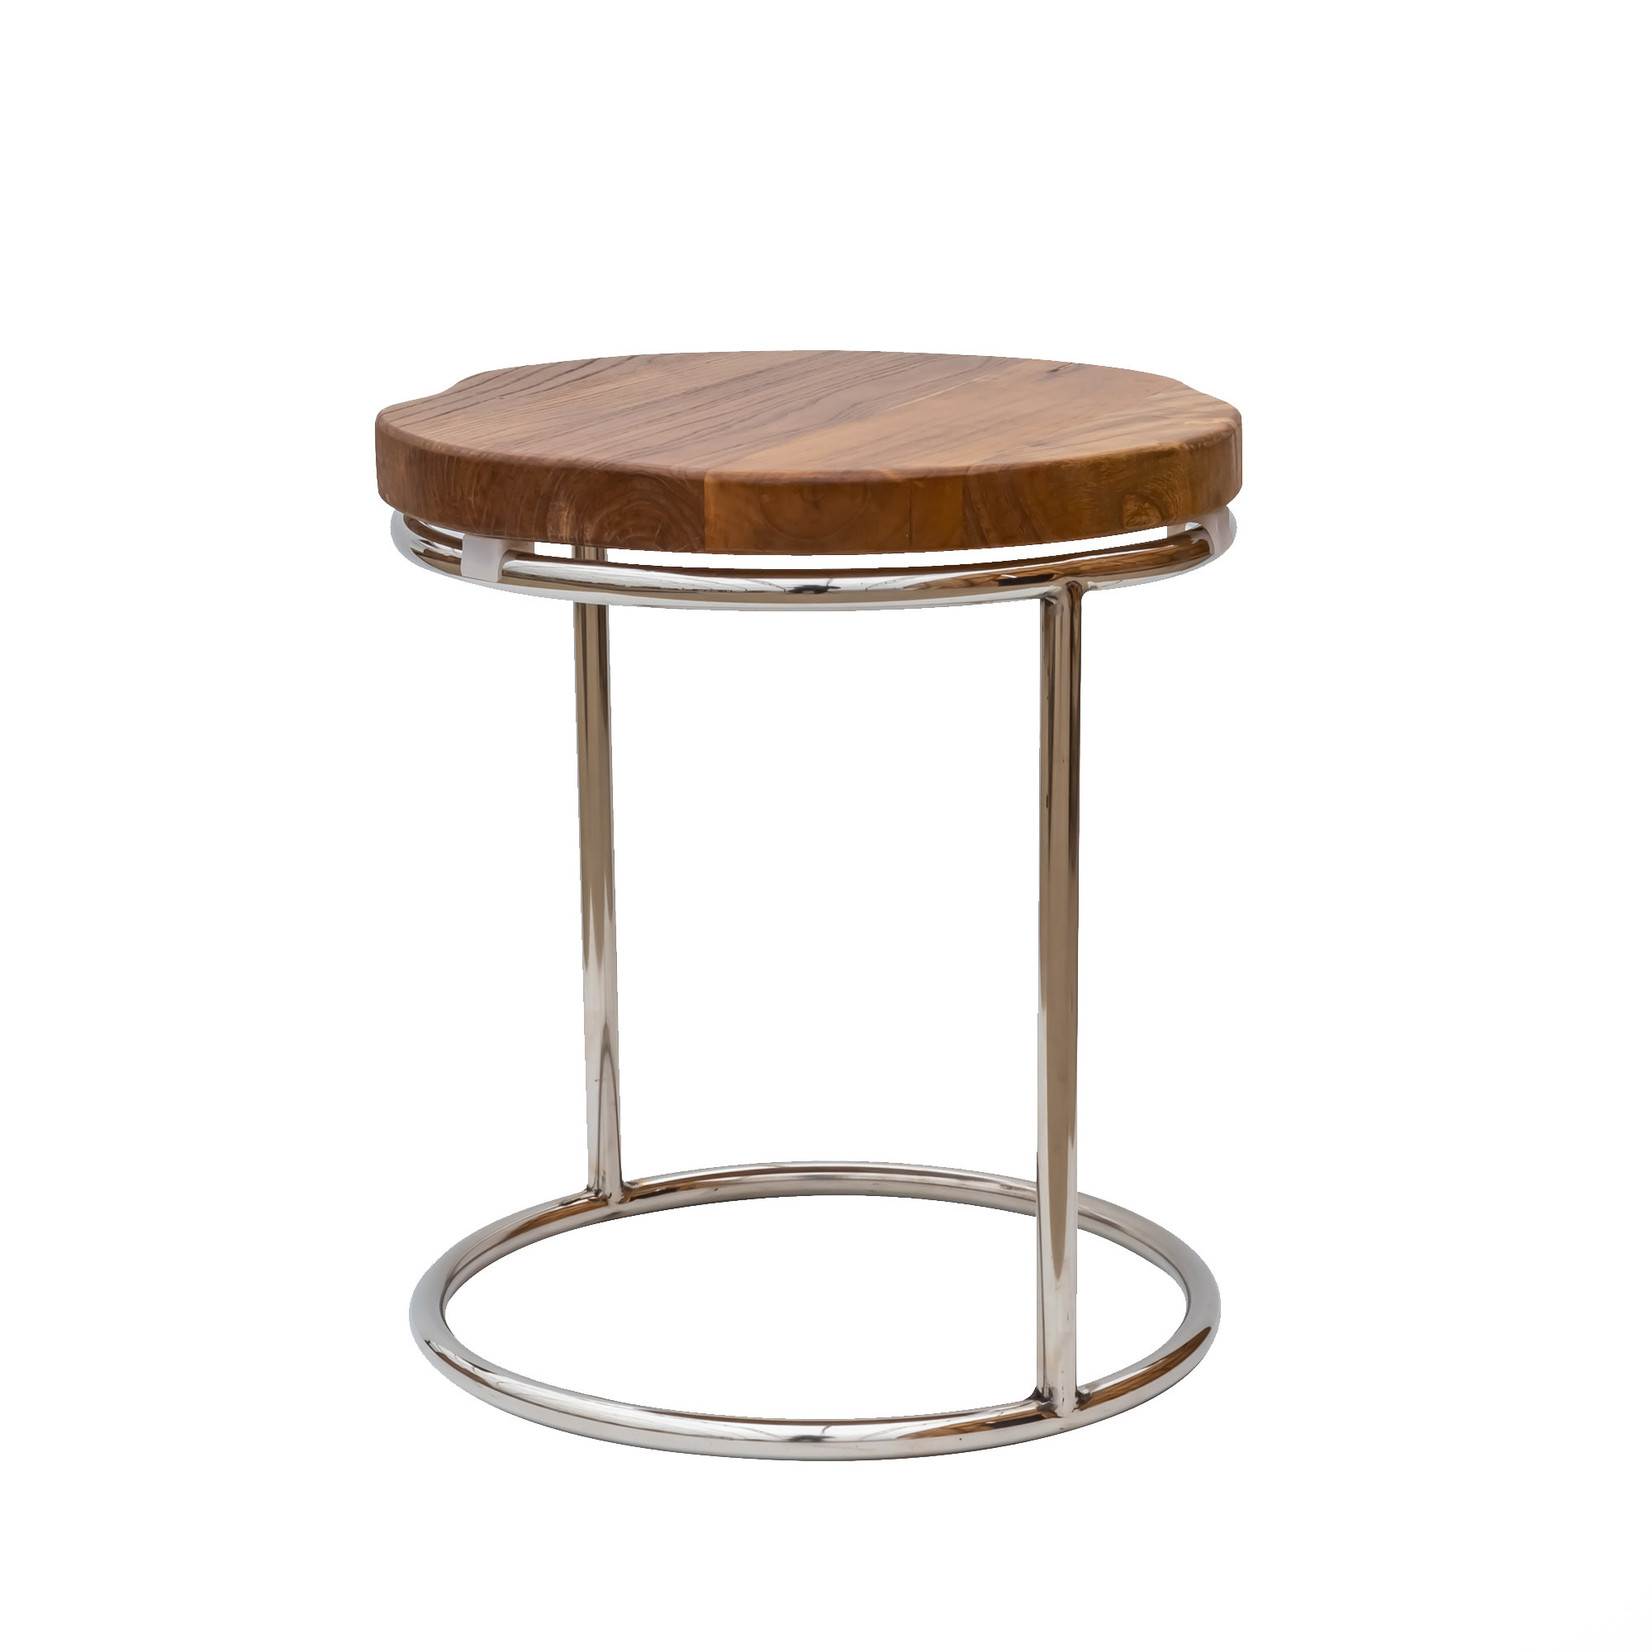 Side Table - Round Sml. w Chrome Legs